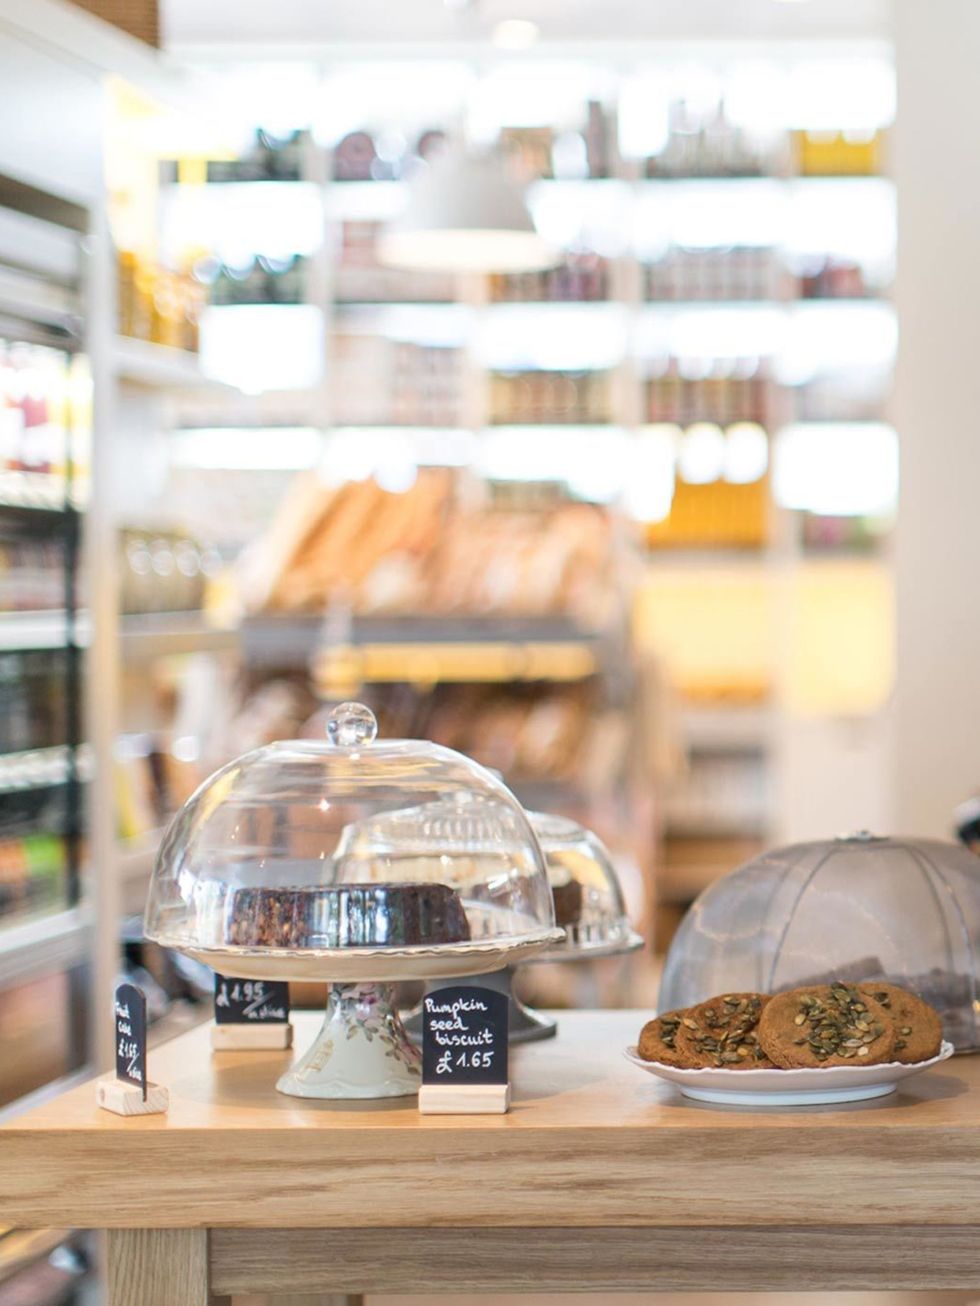 <p>If simple, scrummy food in non-pretentious surroundings is your thing, then pay a visit this week to the newly opened Albion cafe and shop in the NEO Bankside complex situated on Londons South Bank. The second in a line of concept eateries by renowned